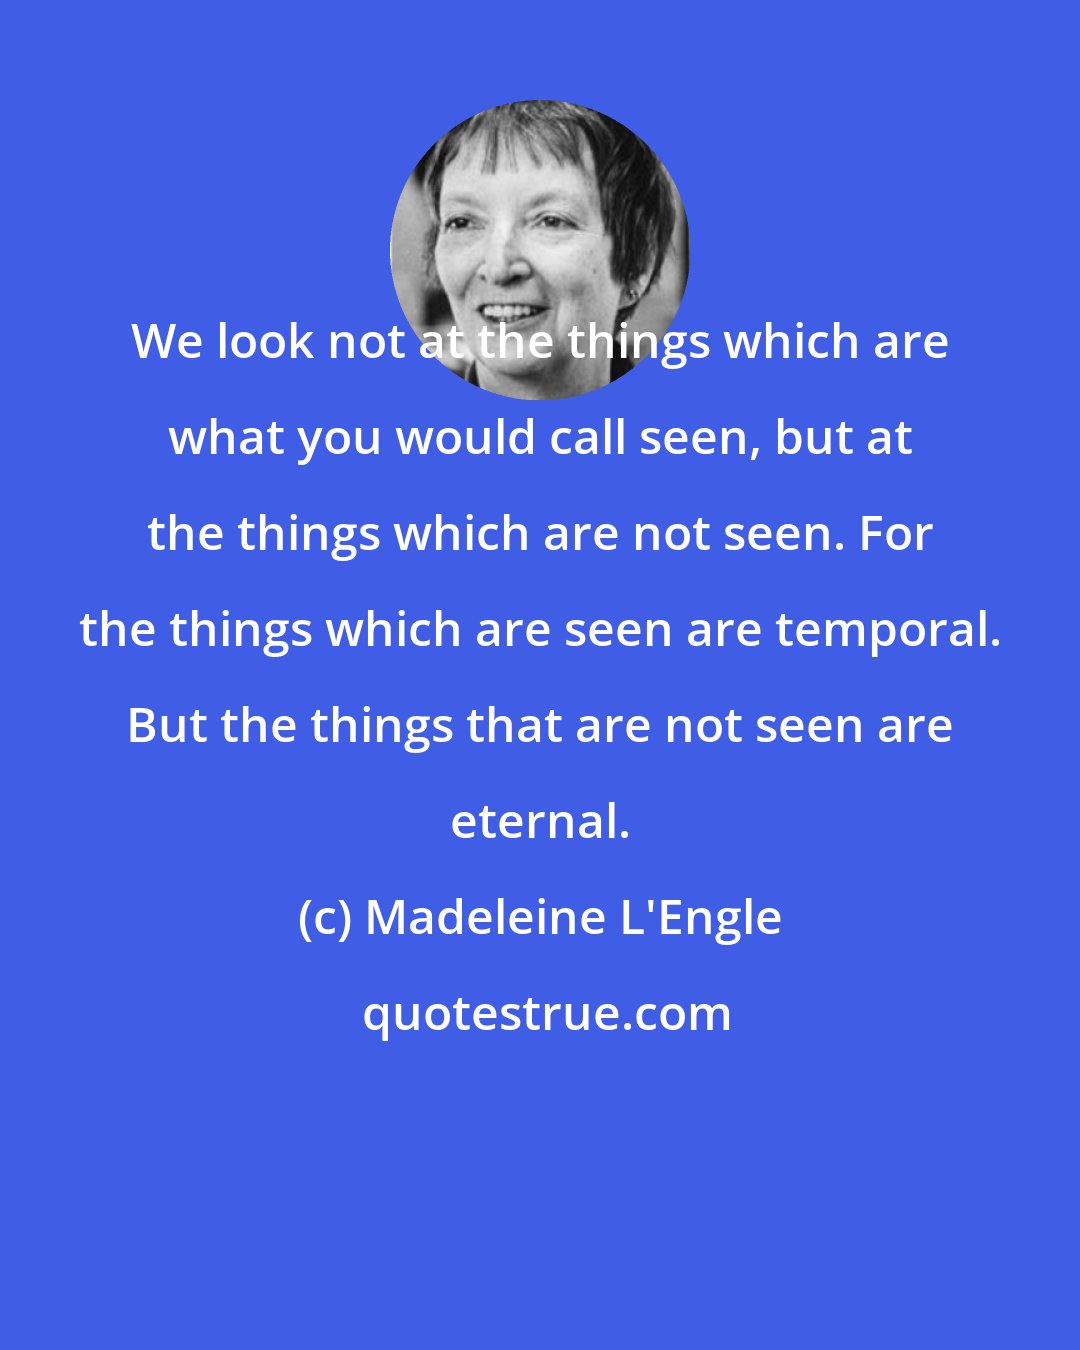 Madeleine L'Engle: We look not at the things which are what you would call seen, but at the things which are not seen. For the things which are seen are temporal. But the things that are not seen are eternal.